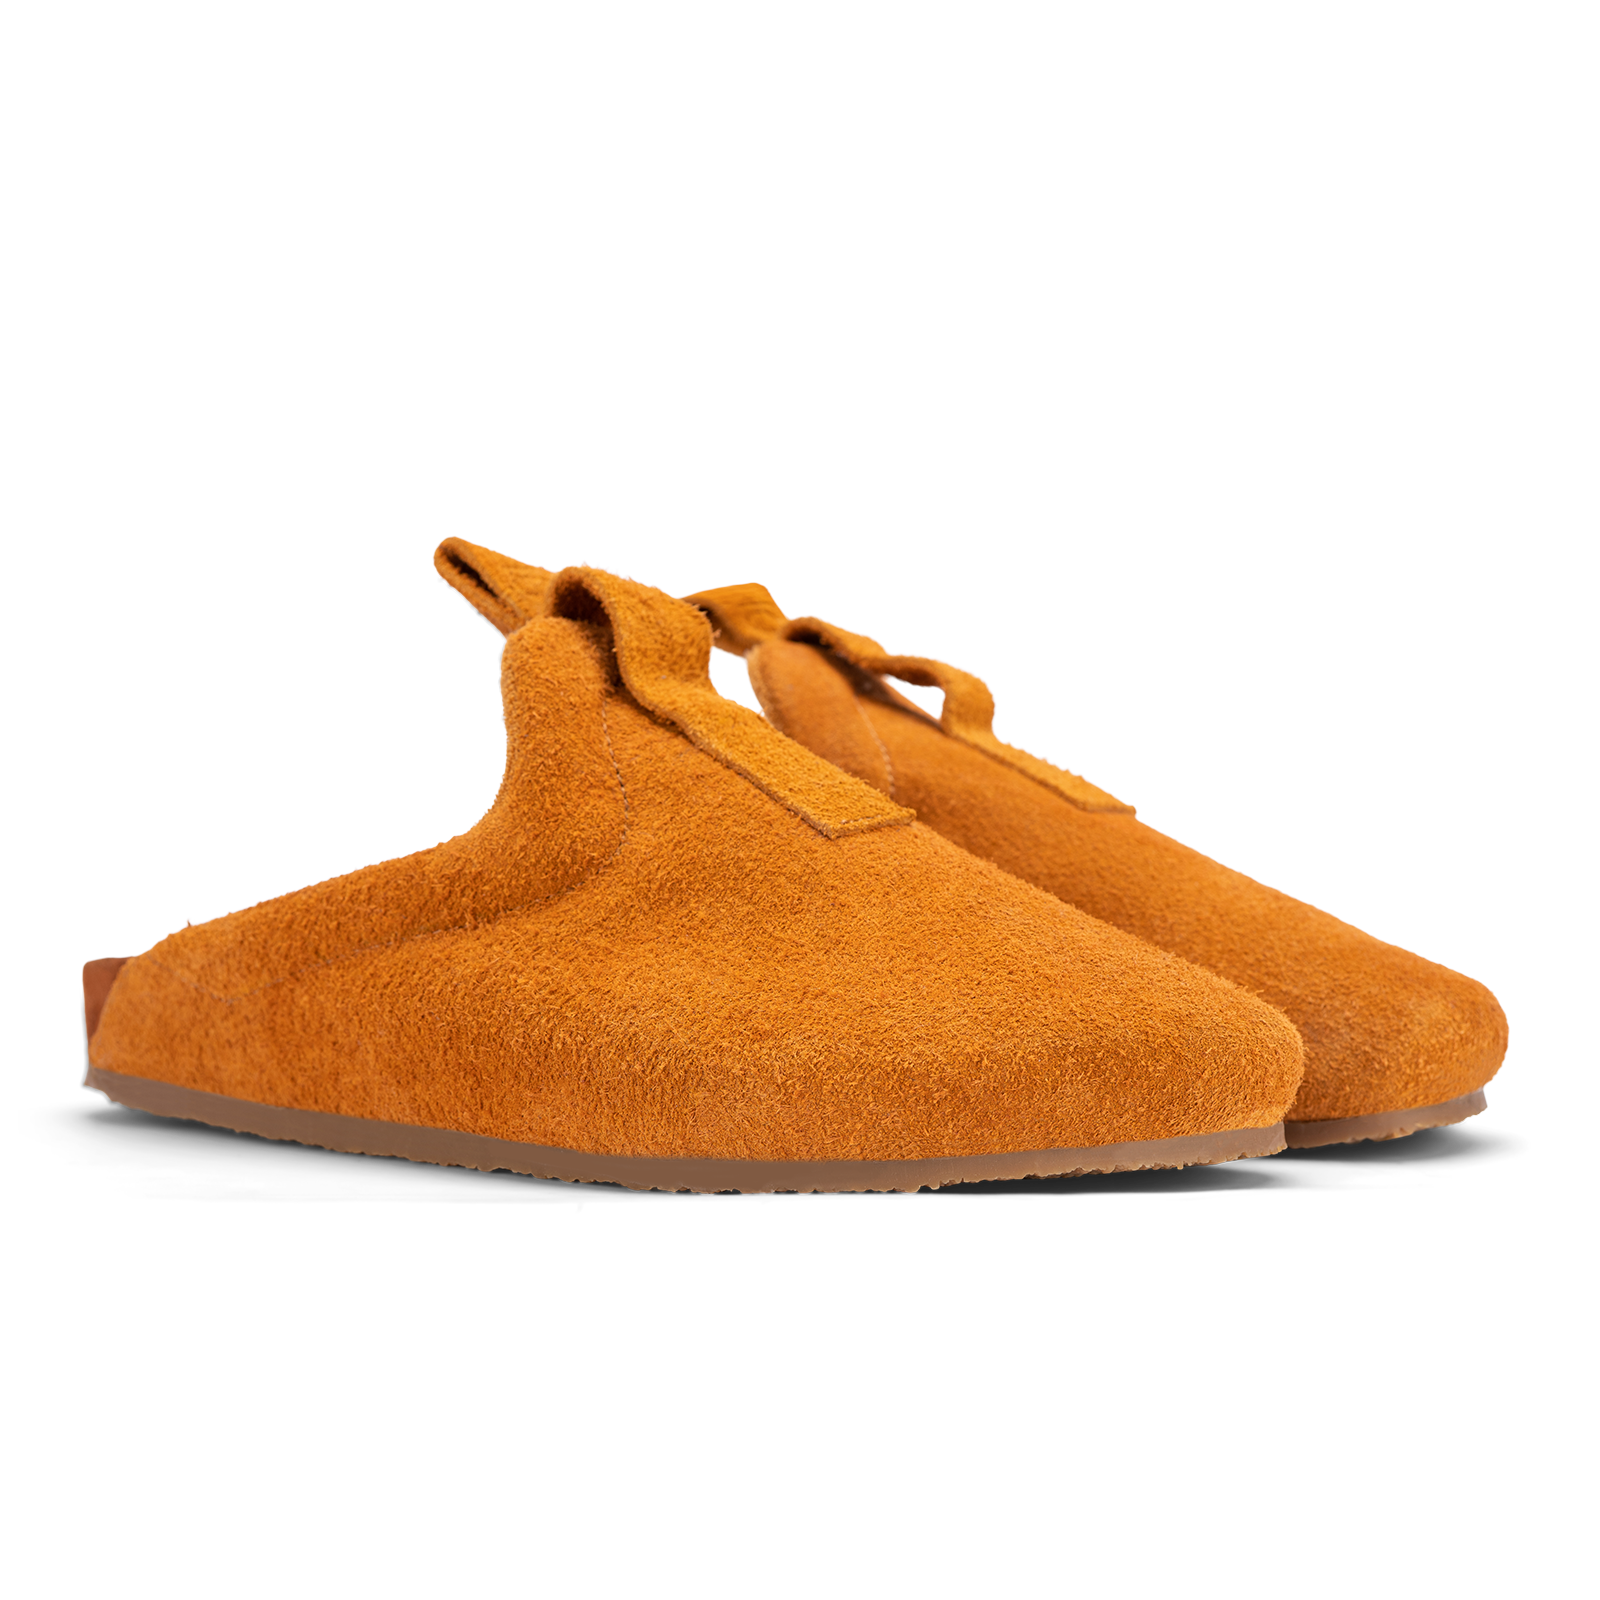 3/4 view Brownish Orange suede upper, cork midsole wrapped in soft suede, Vibram sheet gum rubber outsole